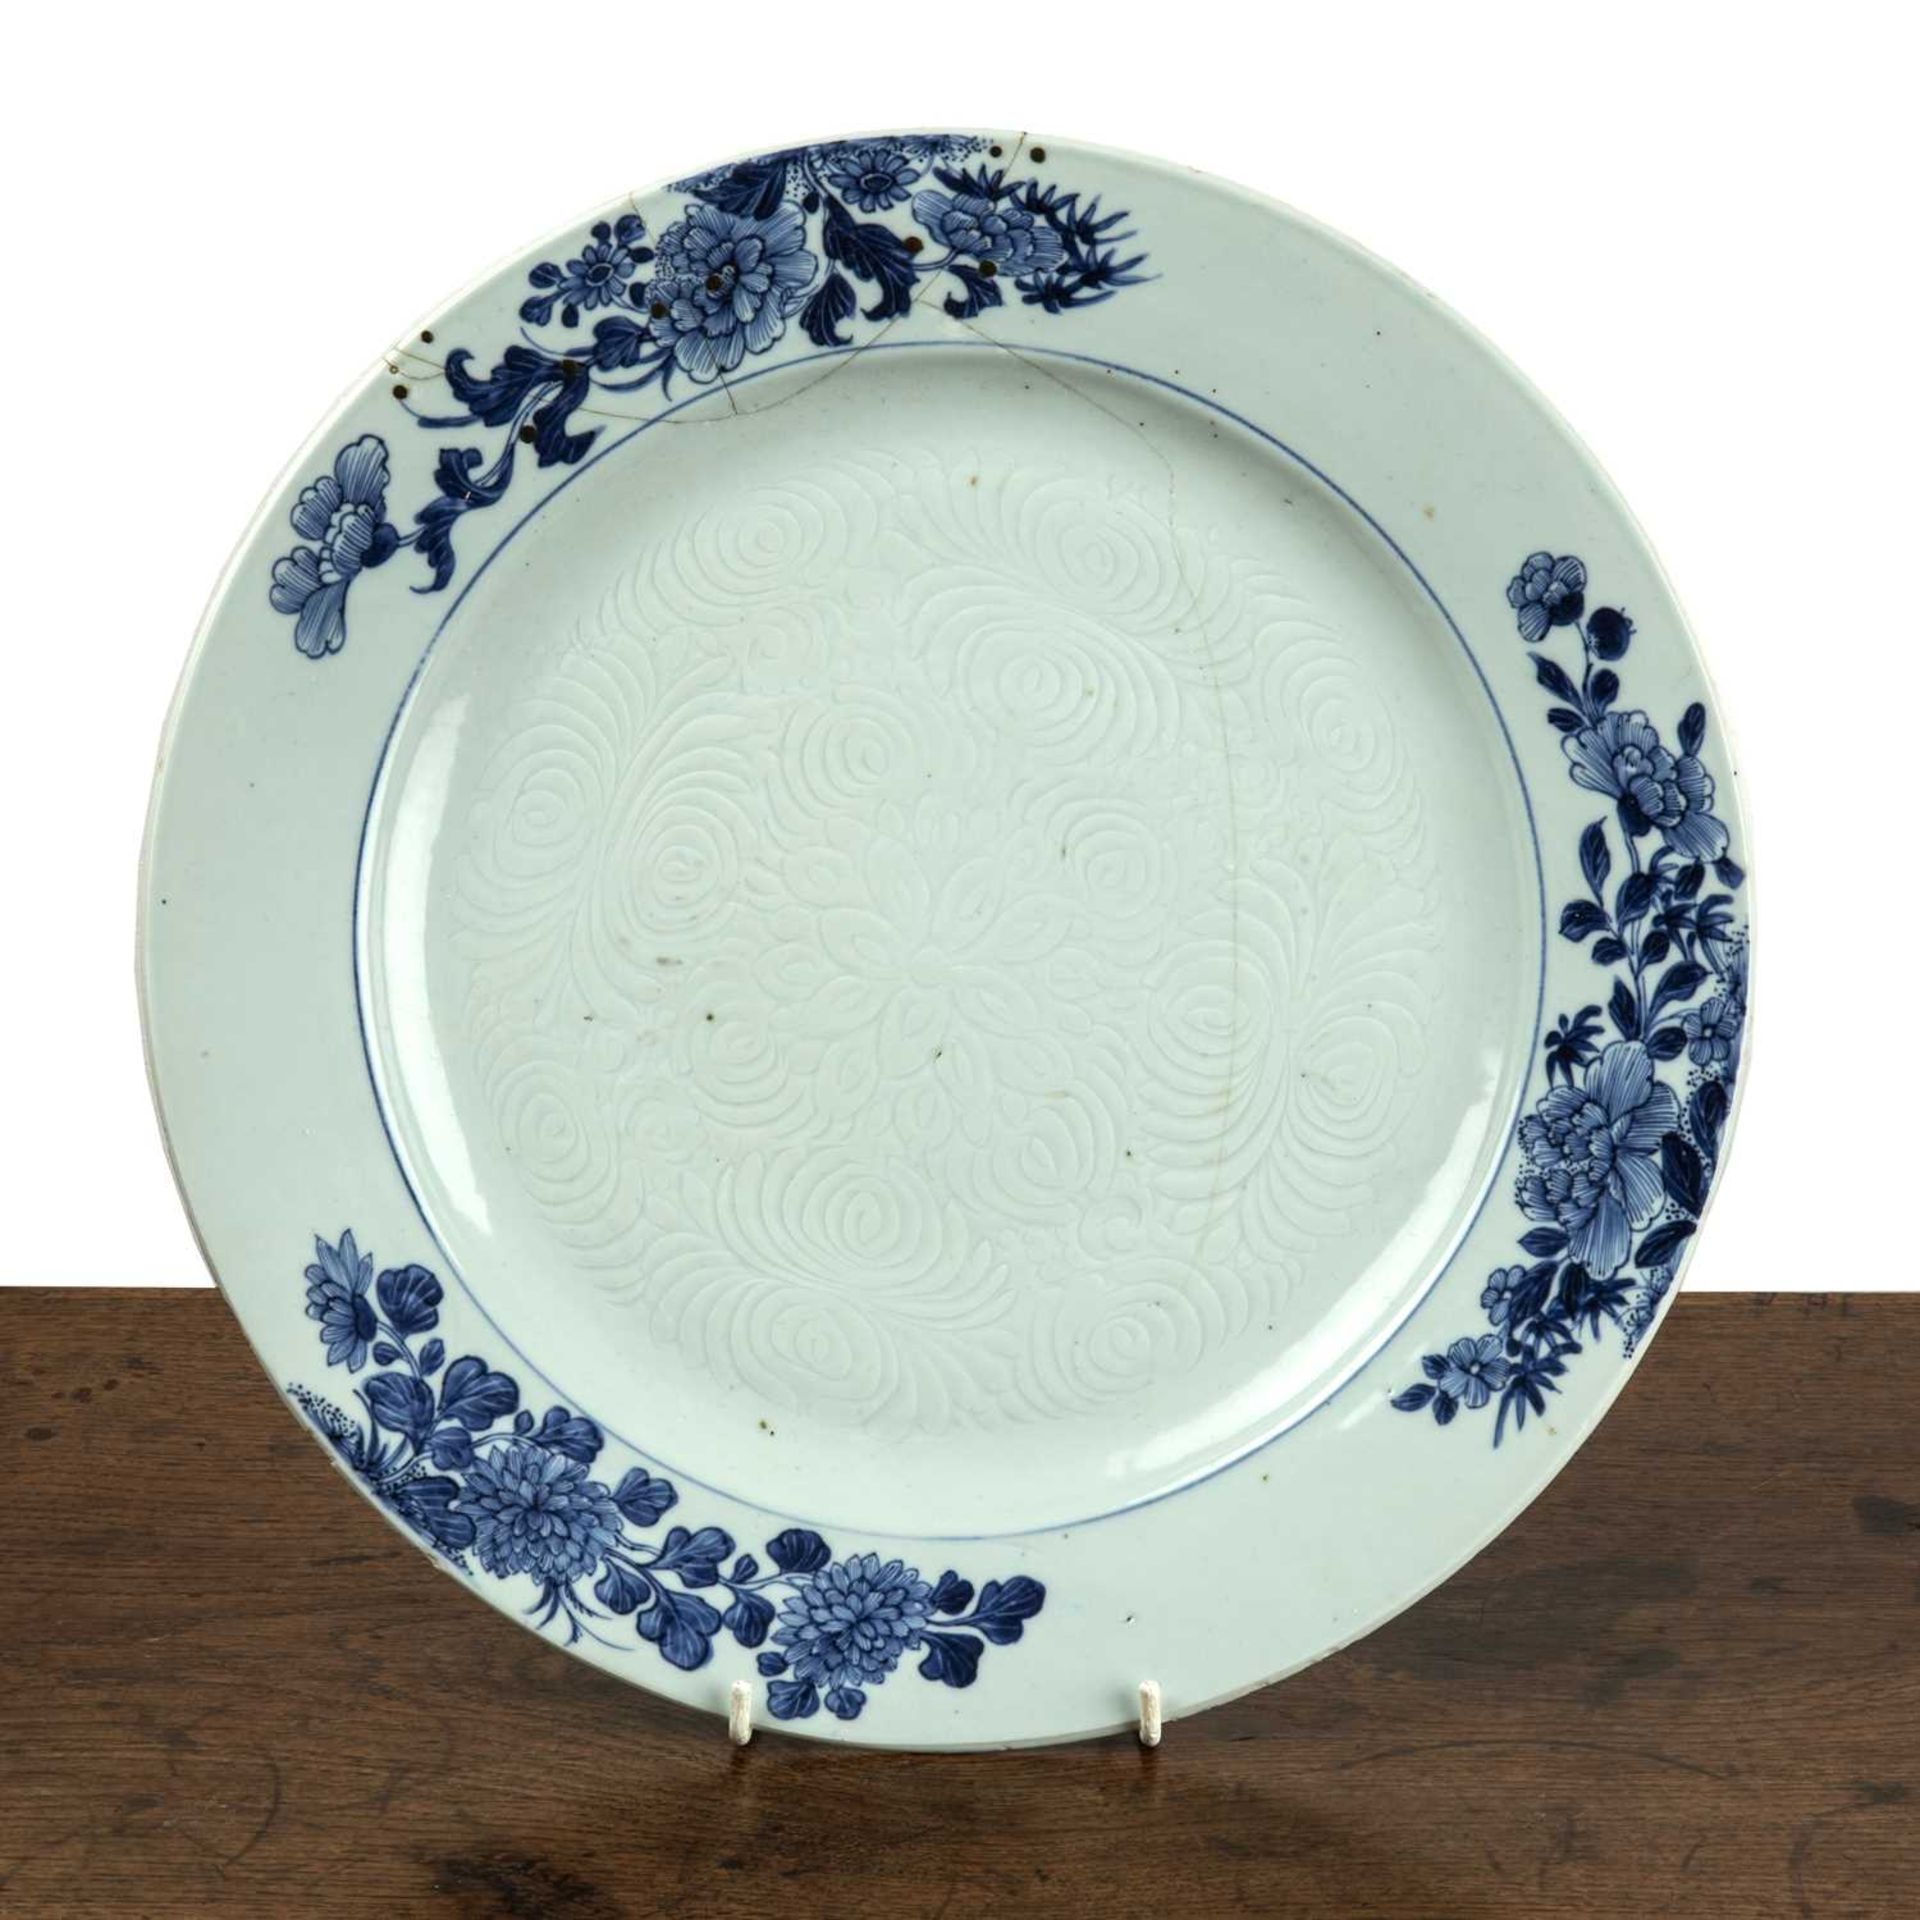 Blue and white porcelain charger Chinese, circa 1800, with a painted border of peonies and